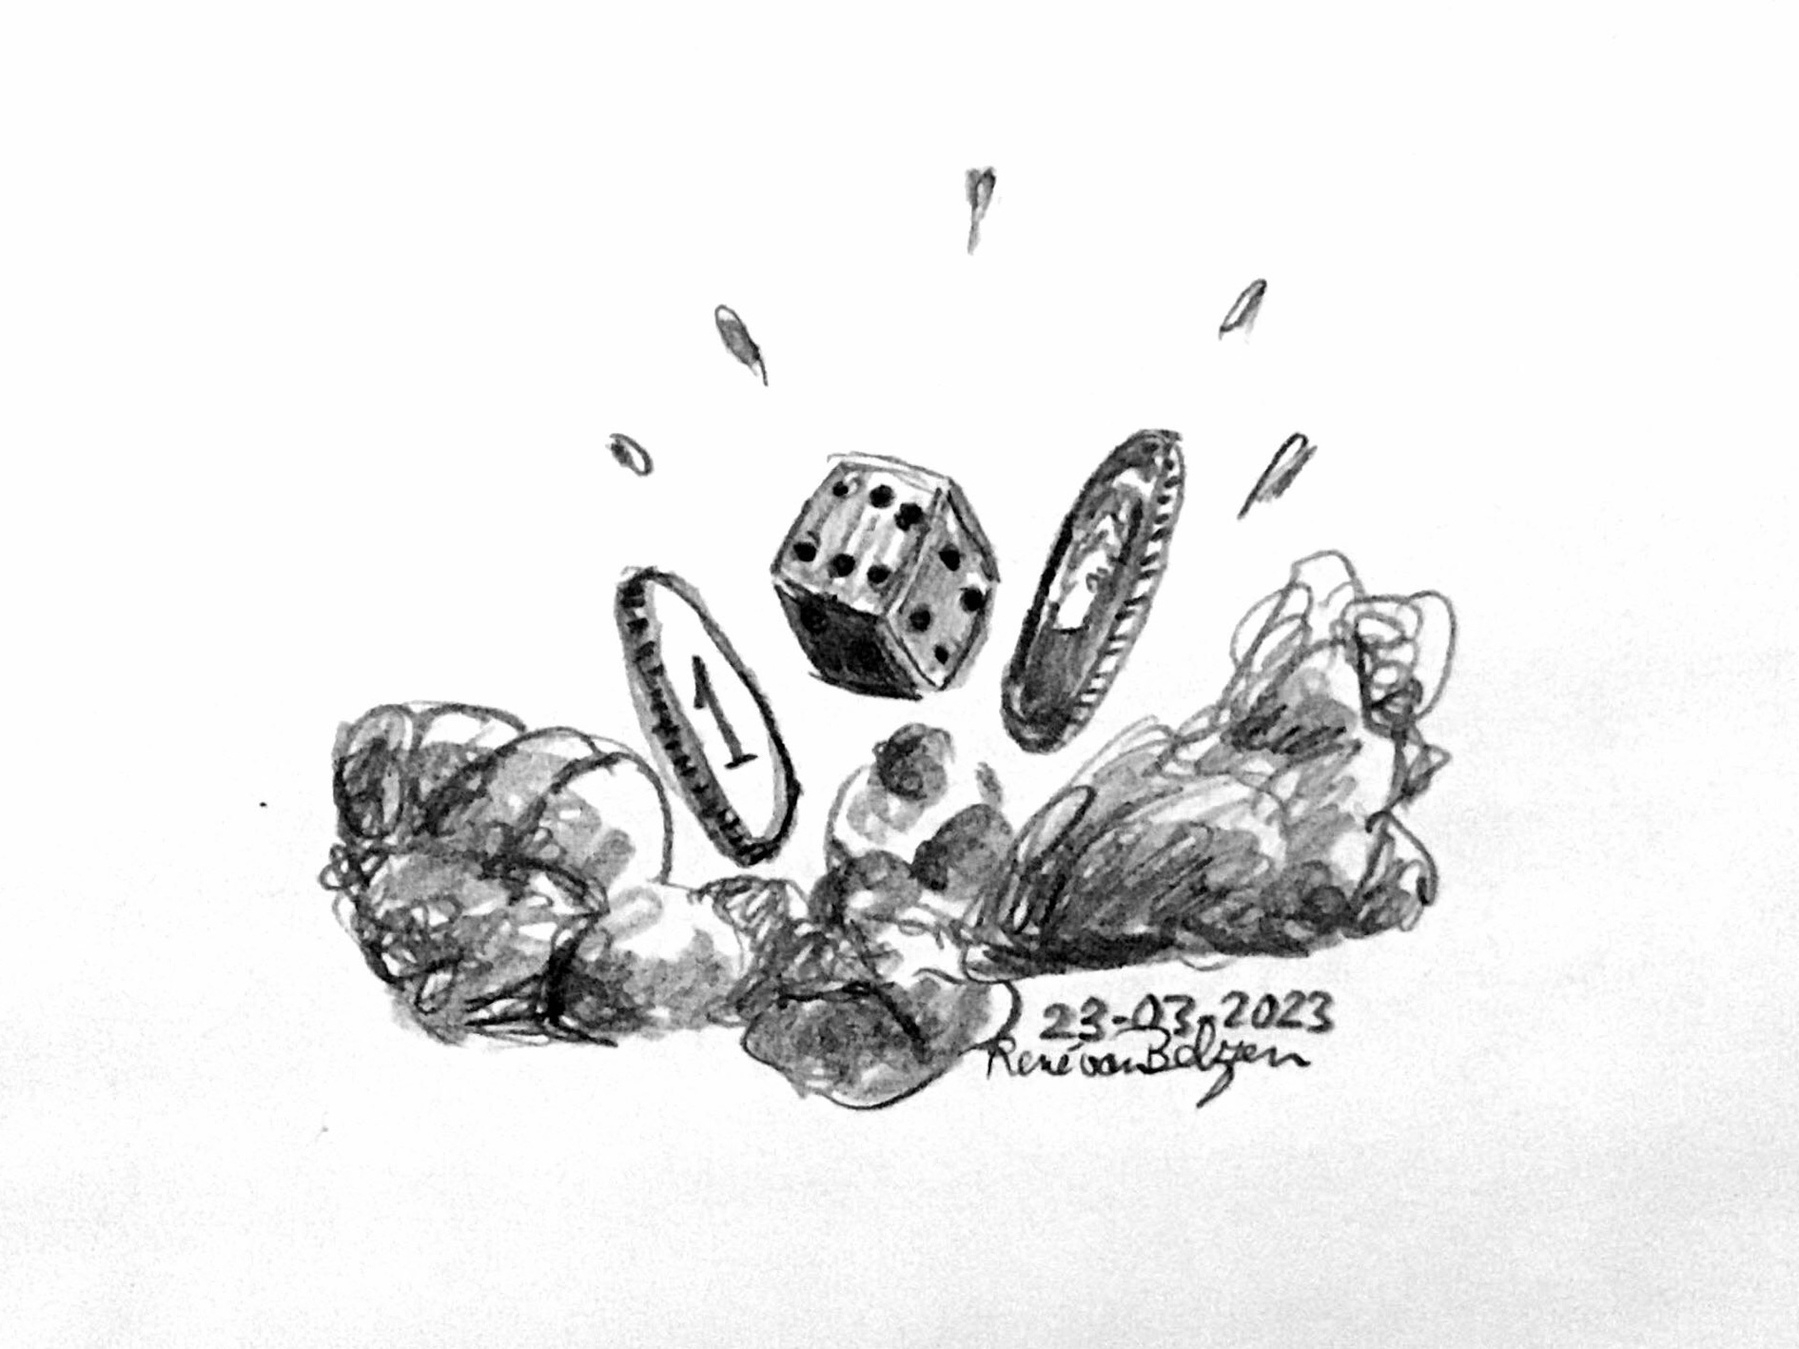 pencil sketch of a die and two coins bouncing up after being thrown